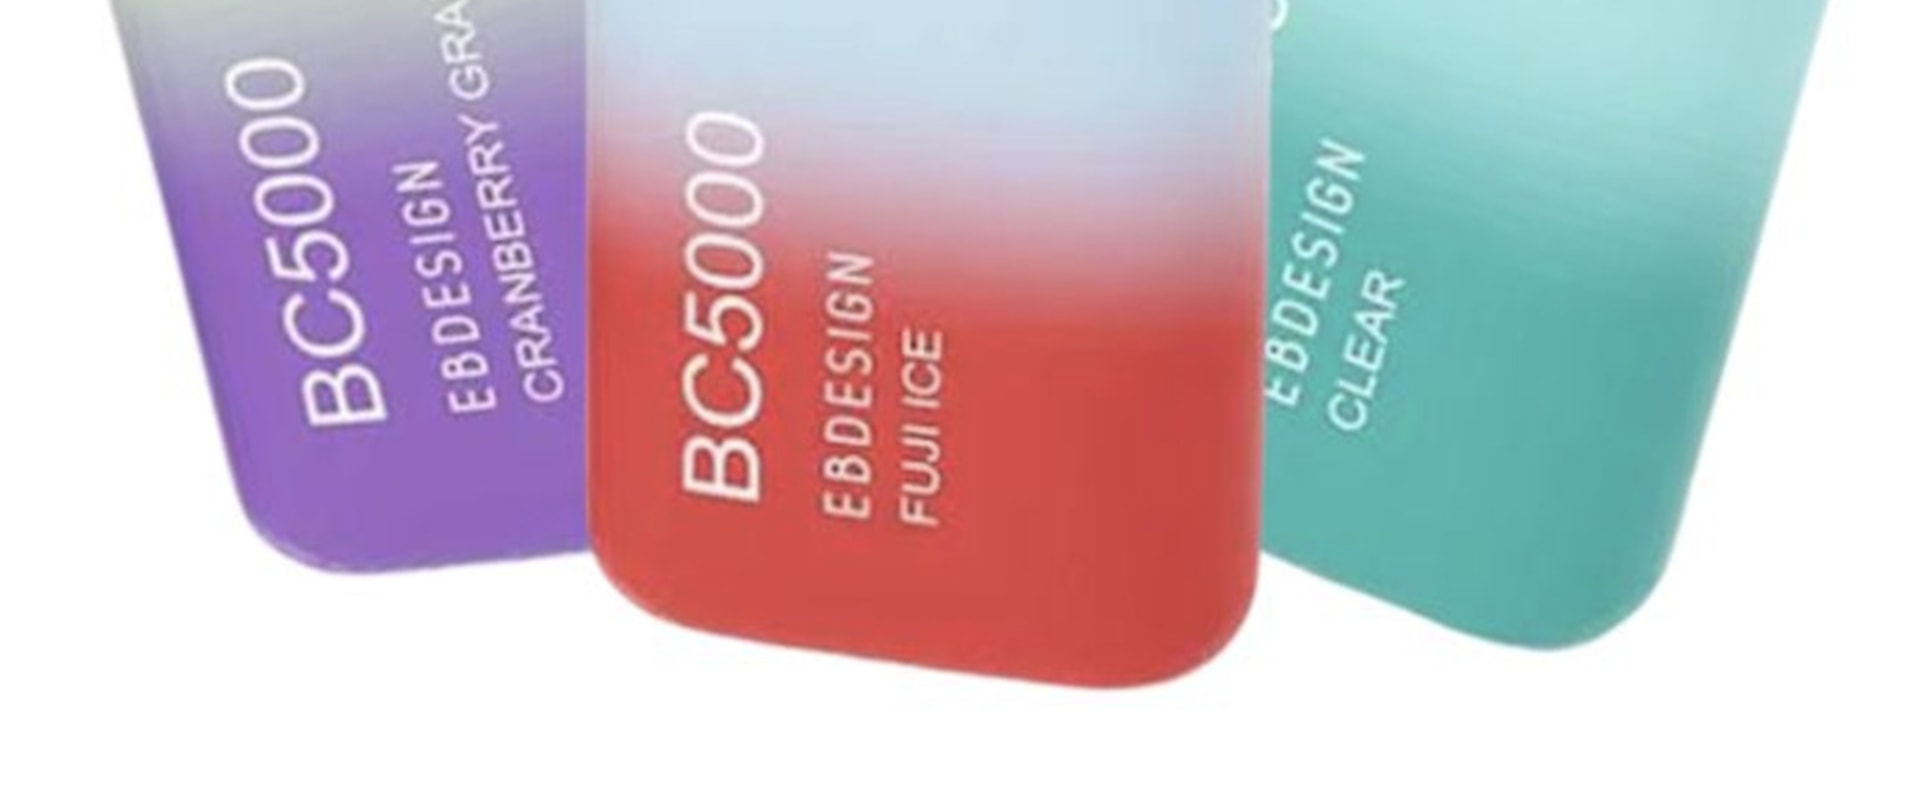 EBdesign Bc5000 Flavors And where to buy?